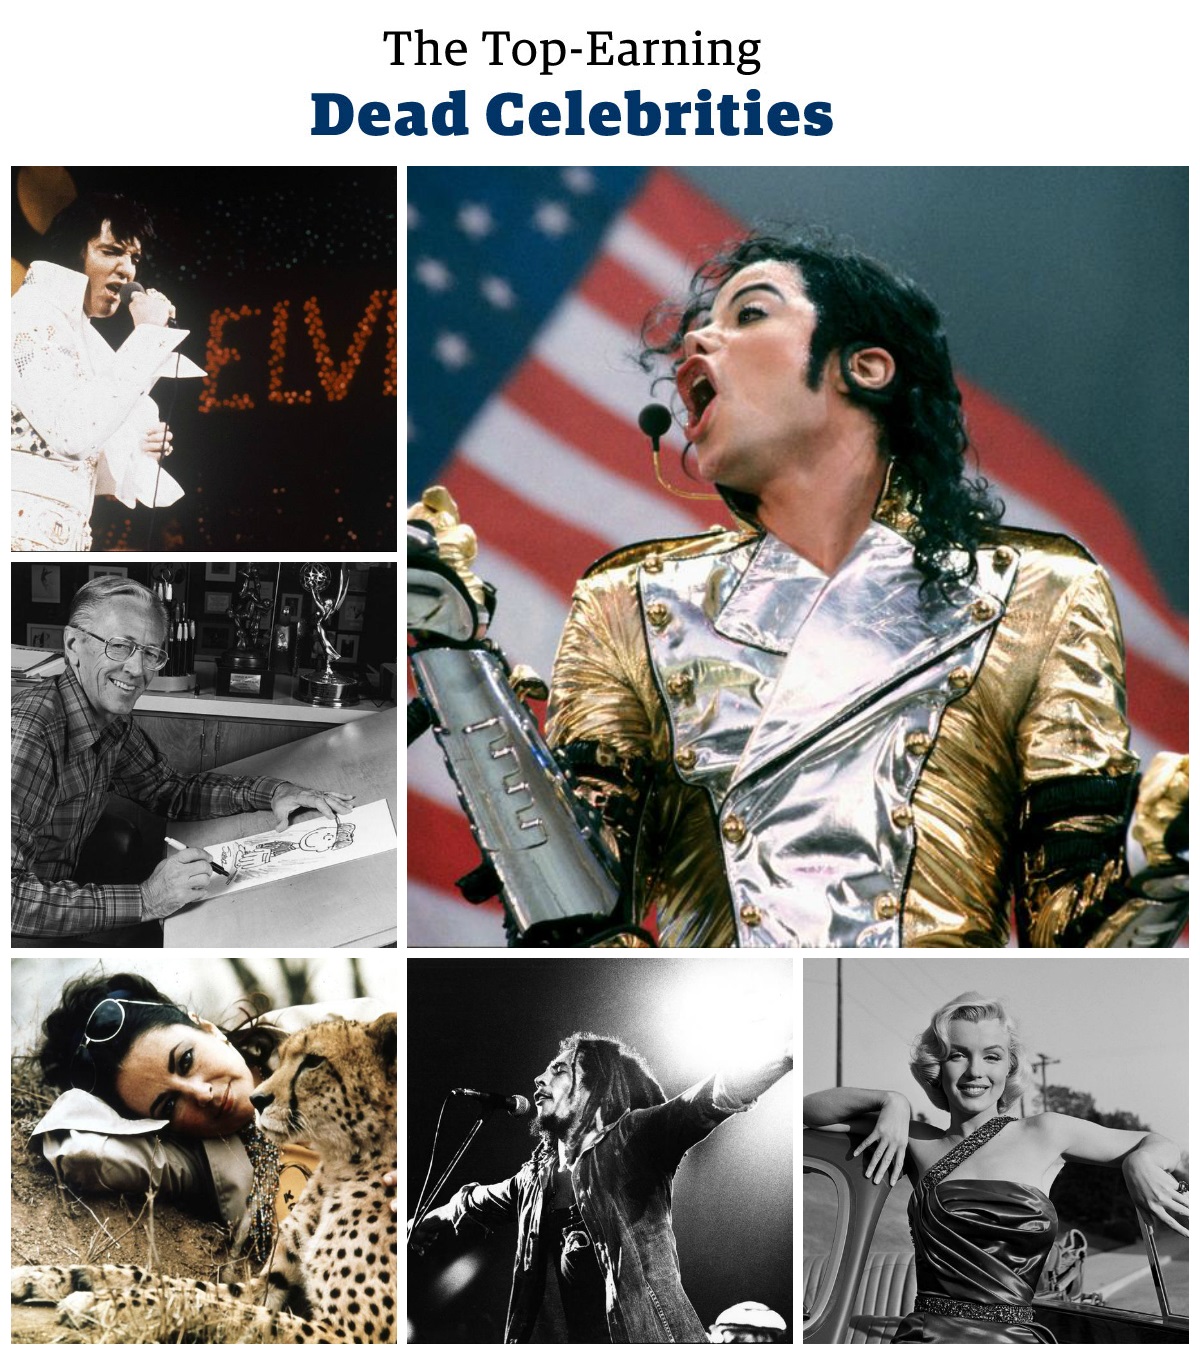 The Top Earning Celebrities, Dead and Alive